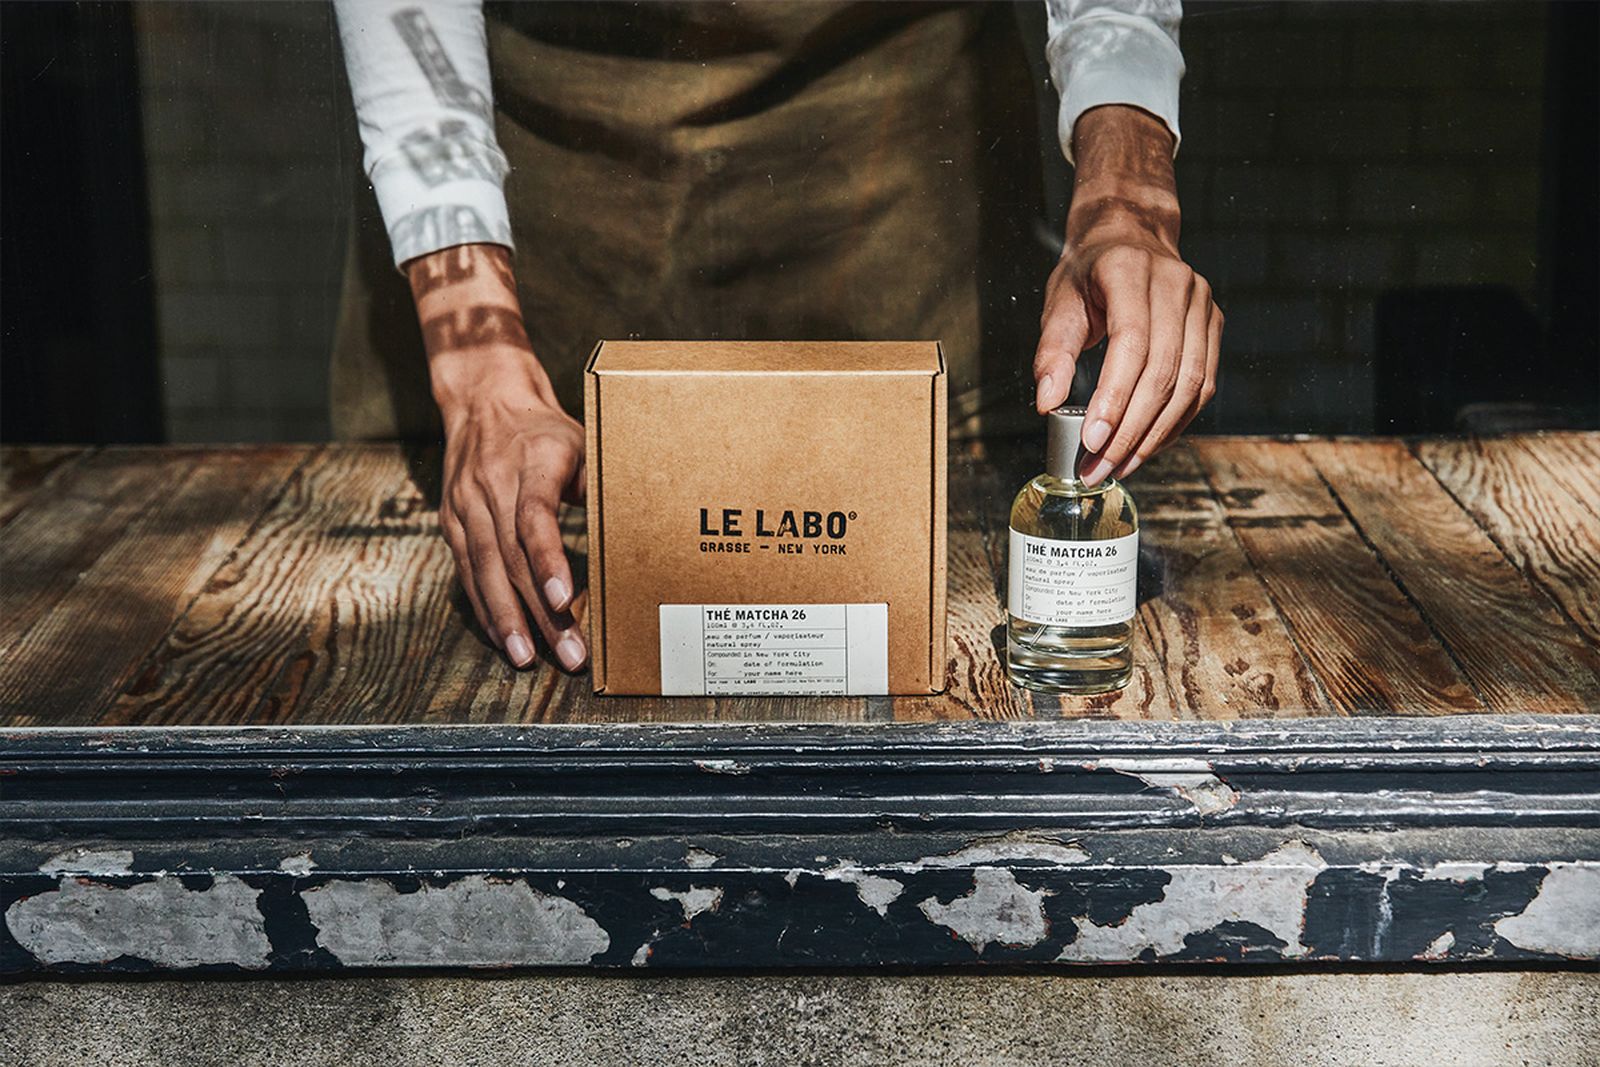 Le Labo Launches The Matcha 26 Fragrance